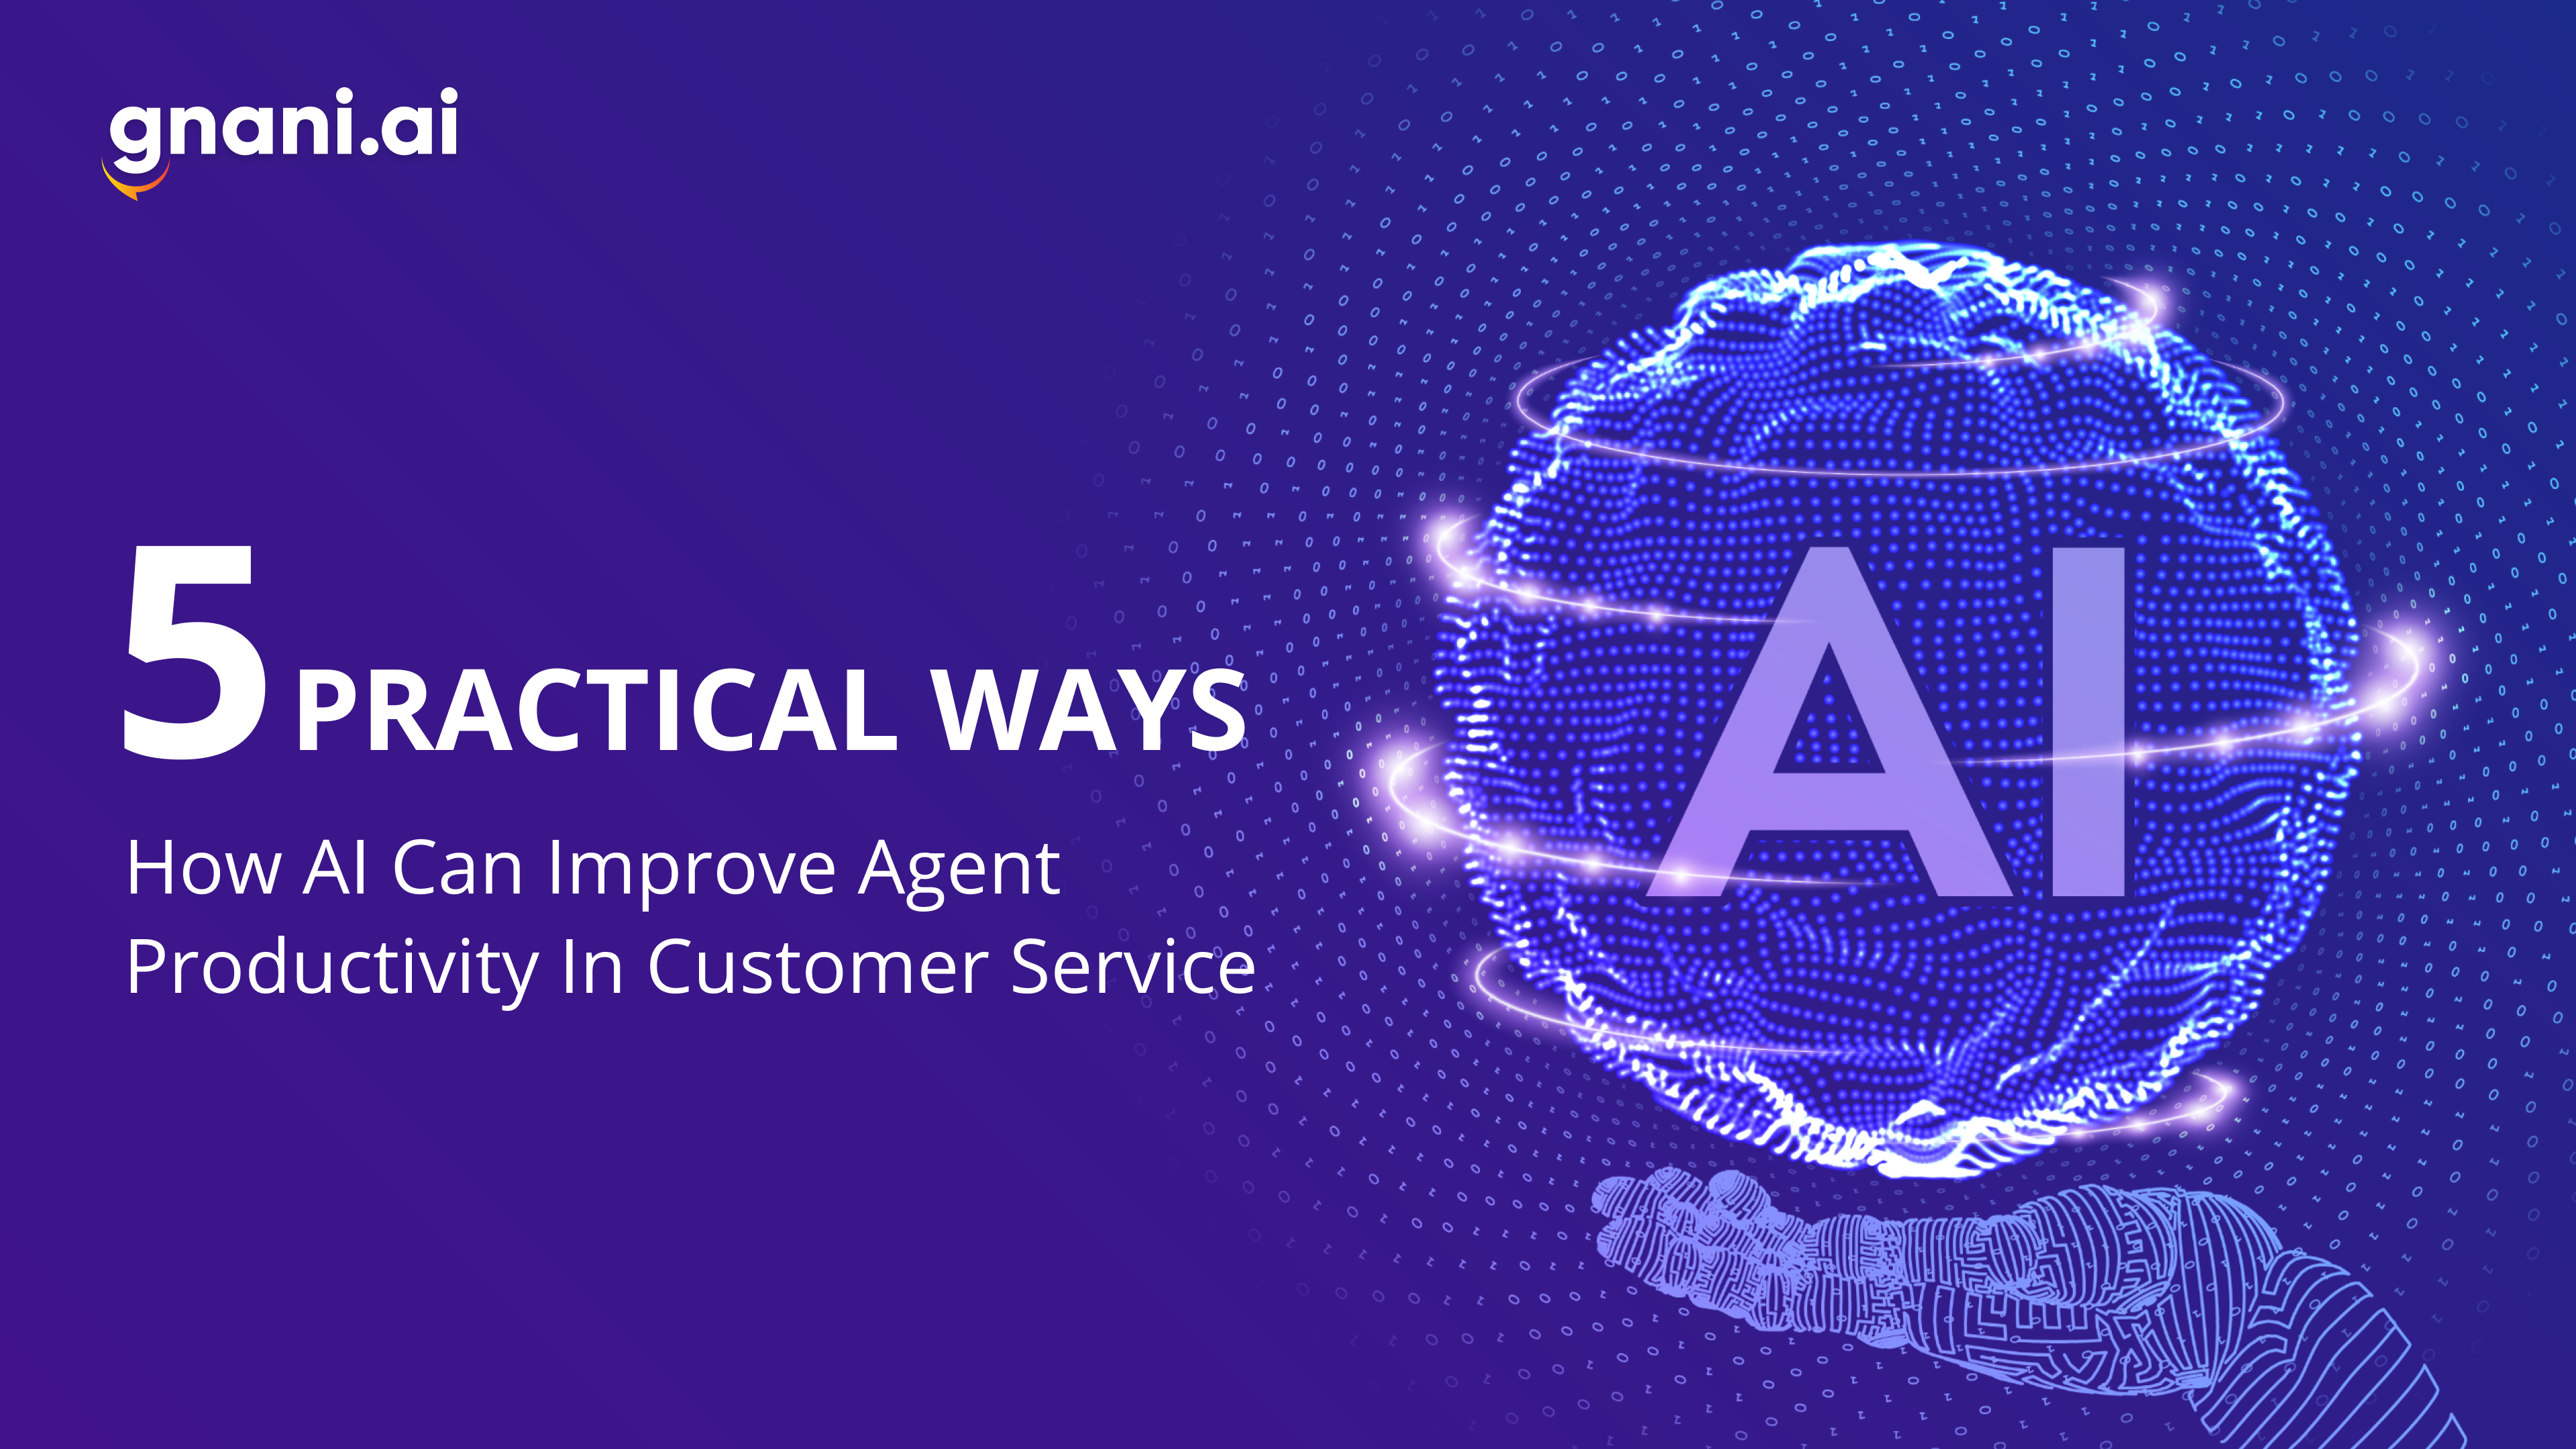 how-ai-can-improve-agent-productivity-in-customer-service-featured-image